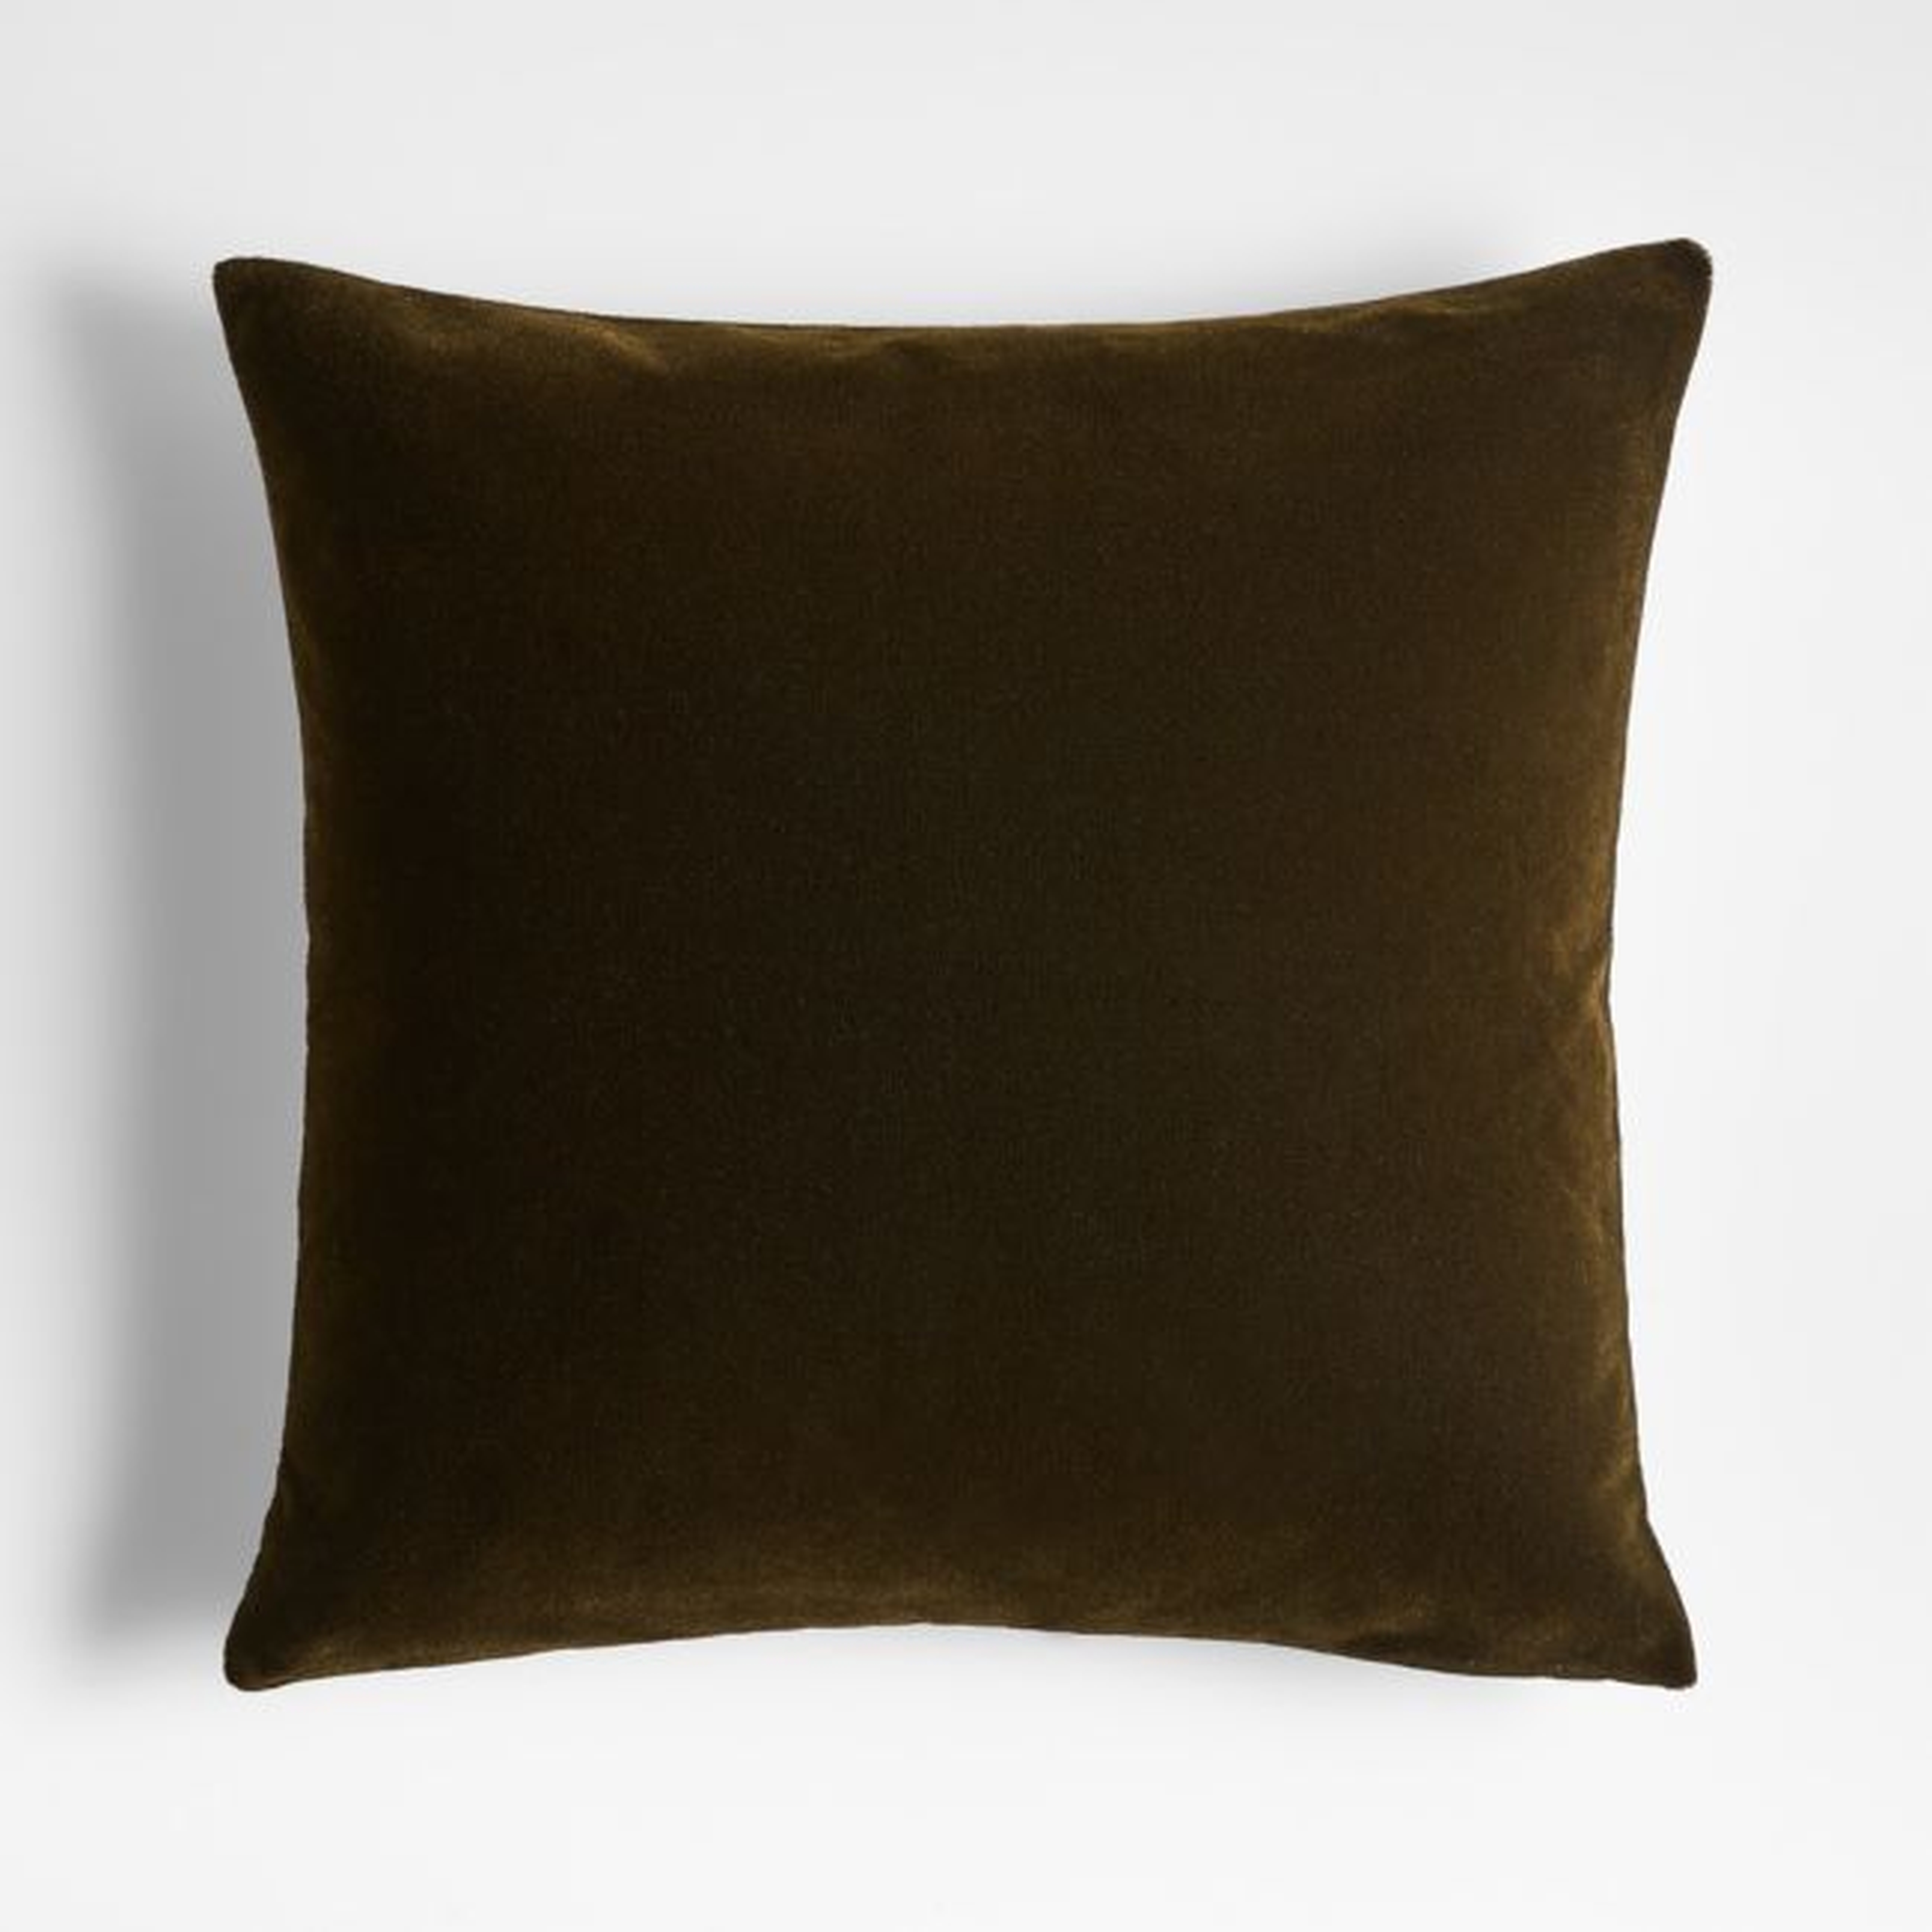 Martini Olive 20"x20" Faux Mohair Throw Pillow with Down-Alternative Insert - Crate and Barrel